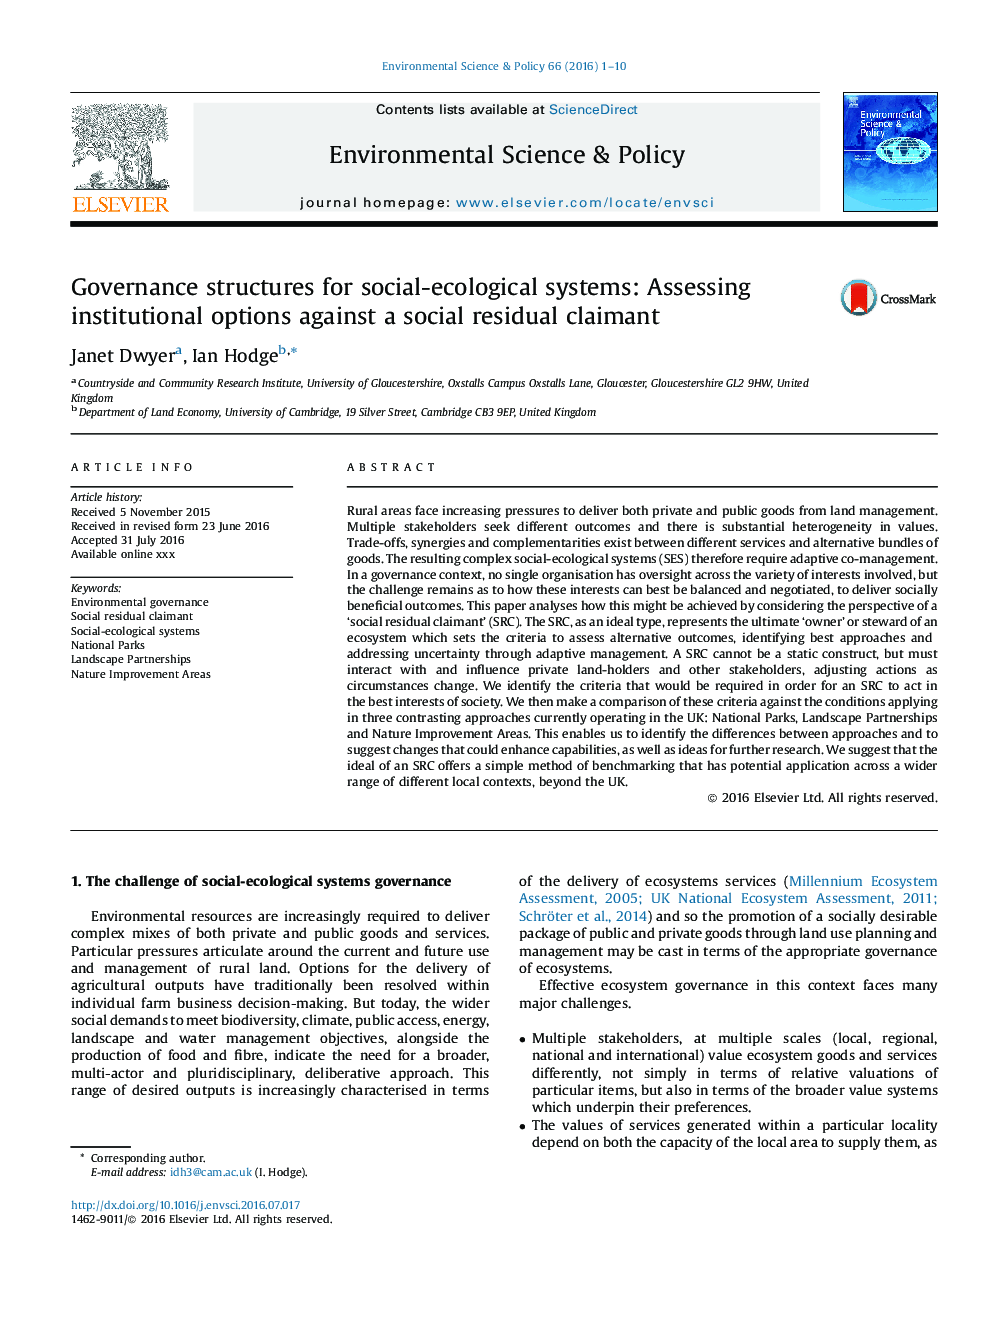 Governance structures for social-ecological systems: Assessing institutional options against a social residual claimant